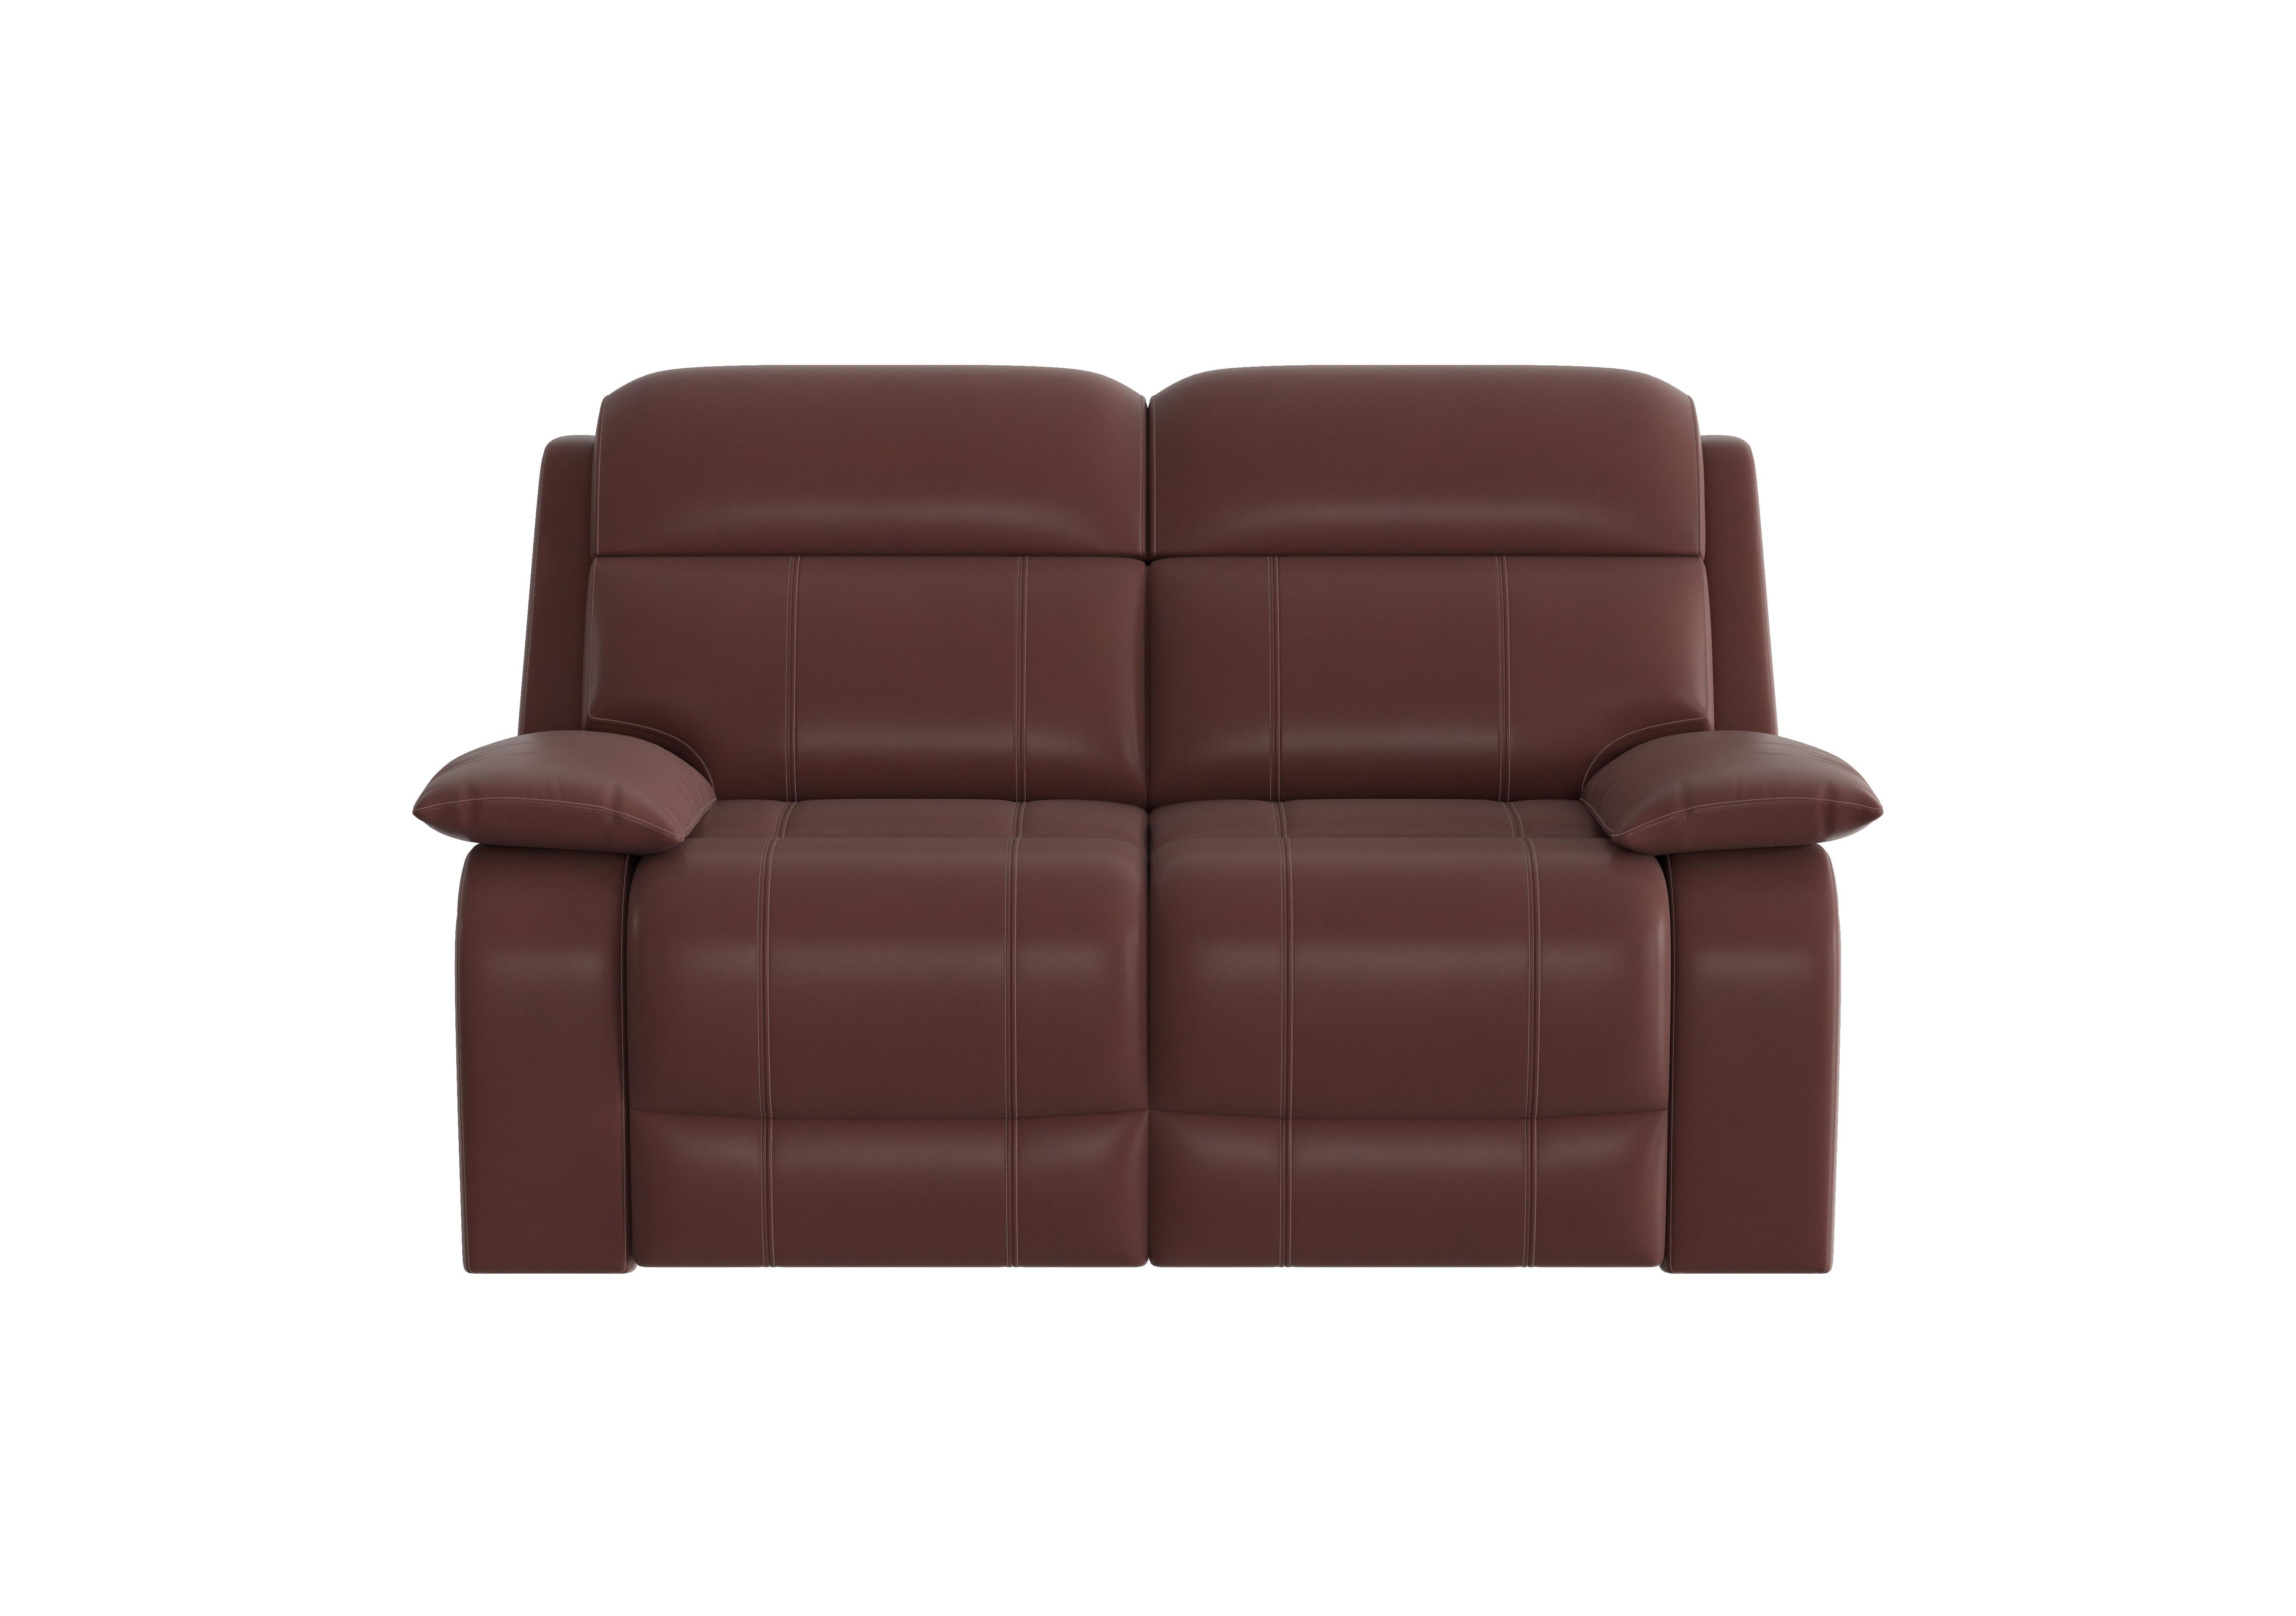 Moreno 2 Seater Leather Power Recliner Sofa with Power Headrests in An-751b Burgundy on Furniture Village